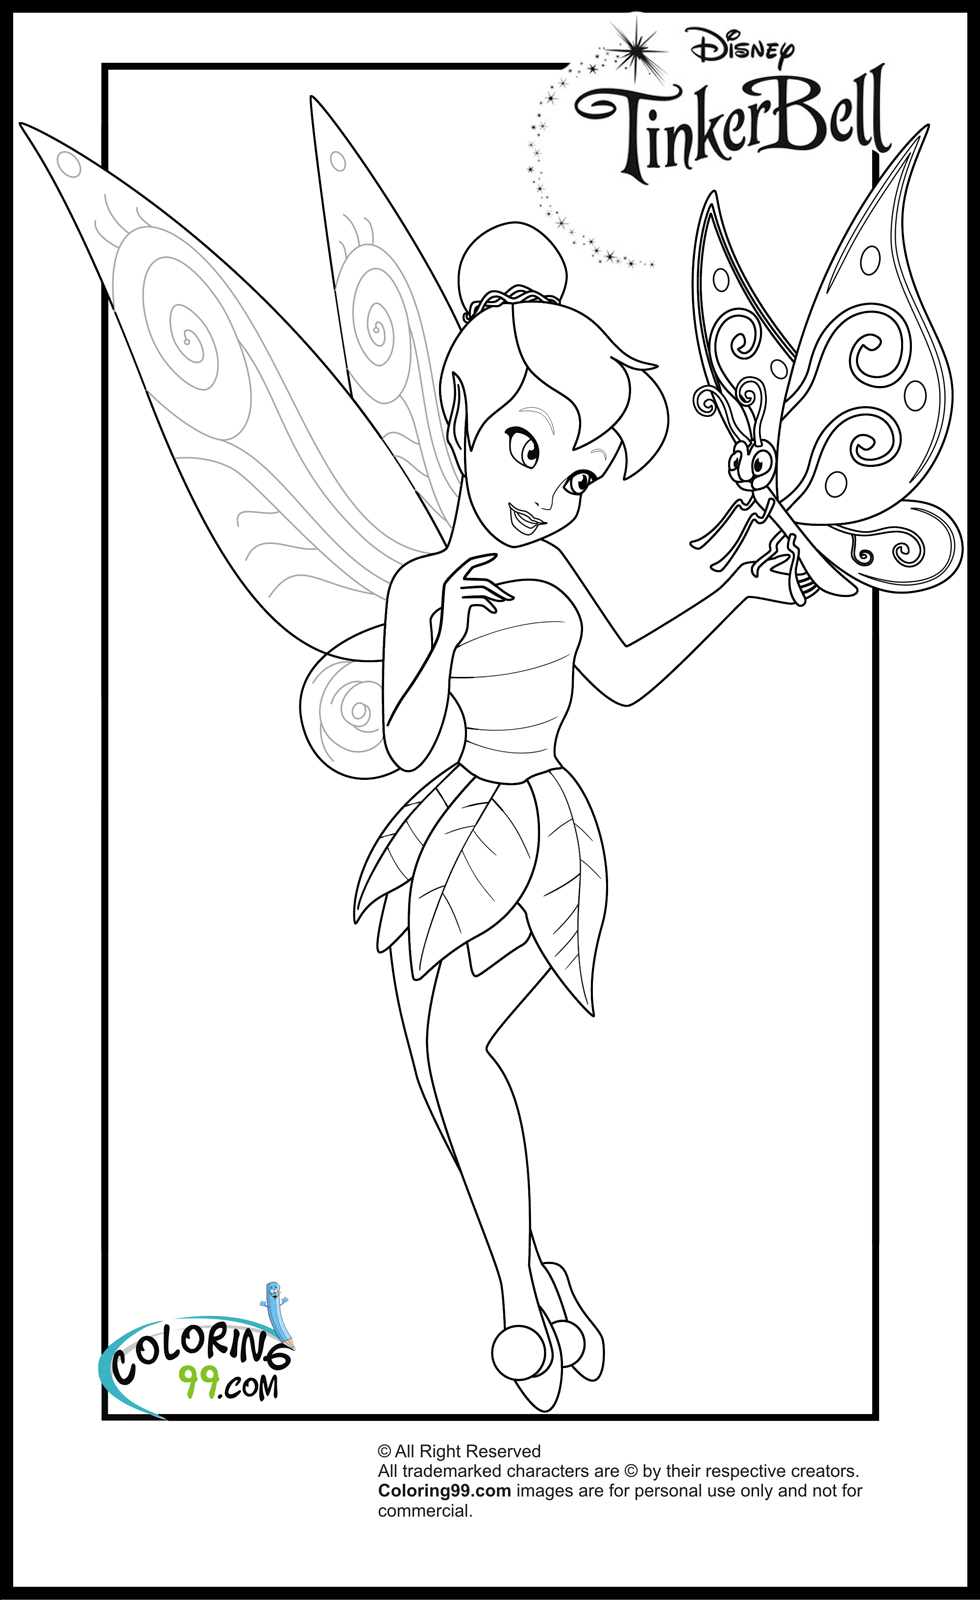 Download Tinkerbell Coloring Pages | Team colors